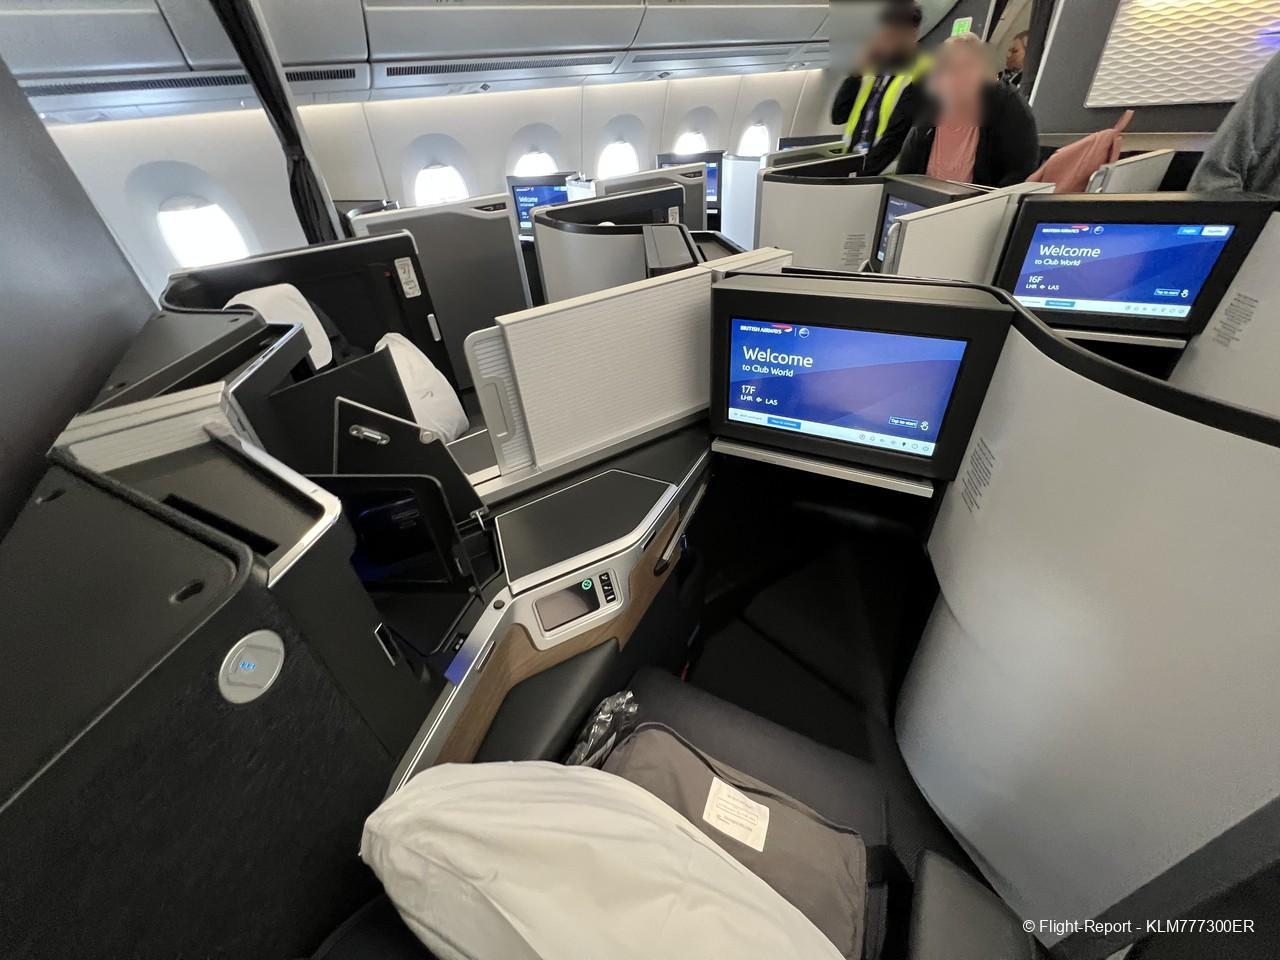 Review of British Airways flight from London to Las Vegas in Economy